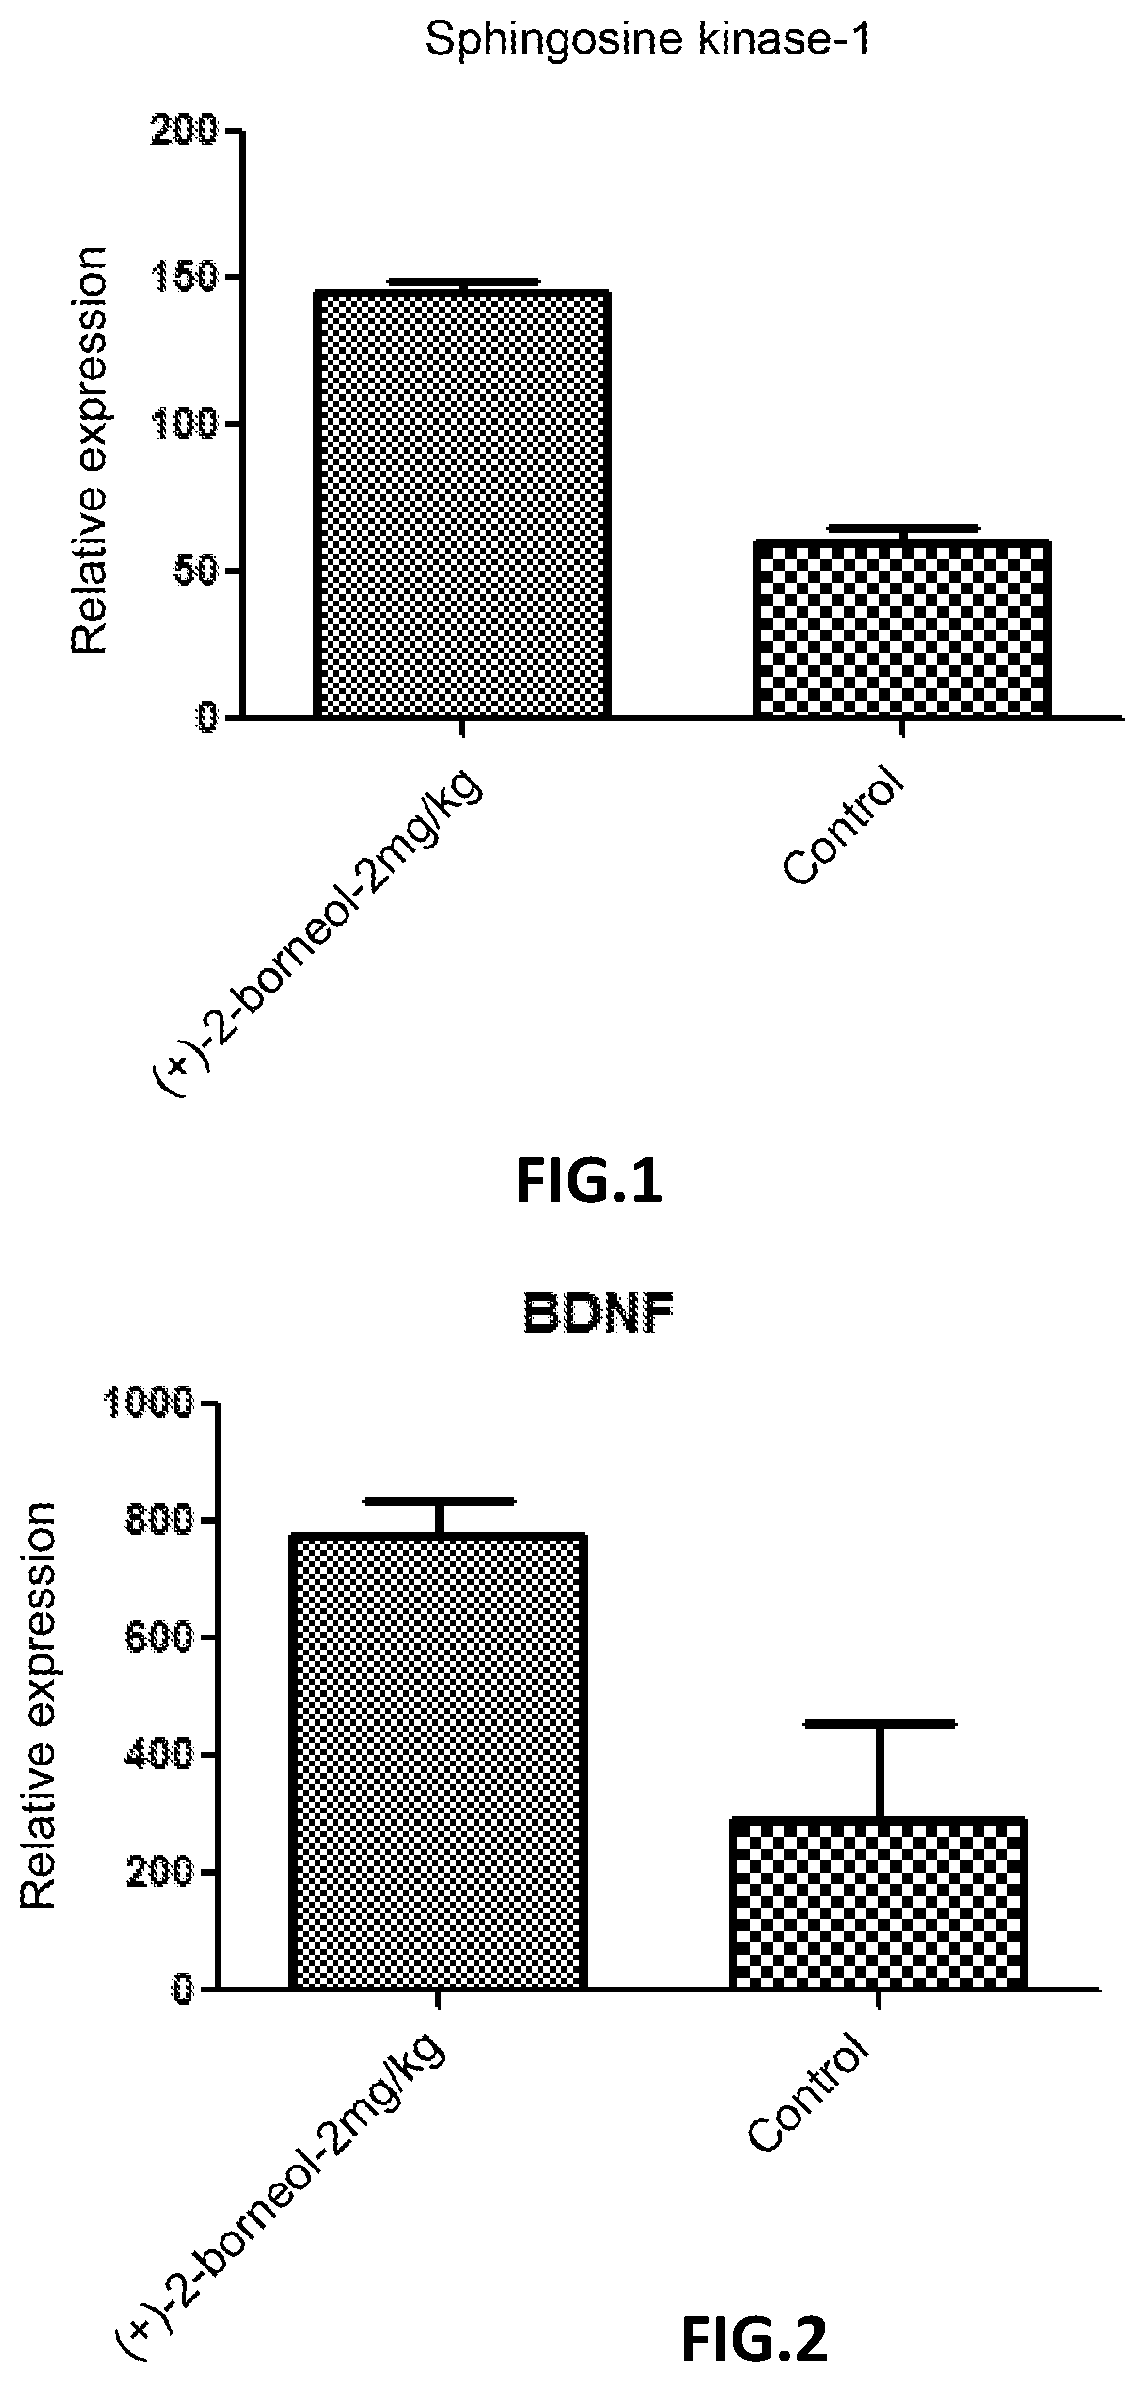 Use Of (+)-2-Borneol In Preparation Of Drug For Promoting Upregulation Of Expression Of Sphingosine Kinase-1 And/Or BDNF